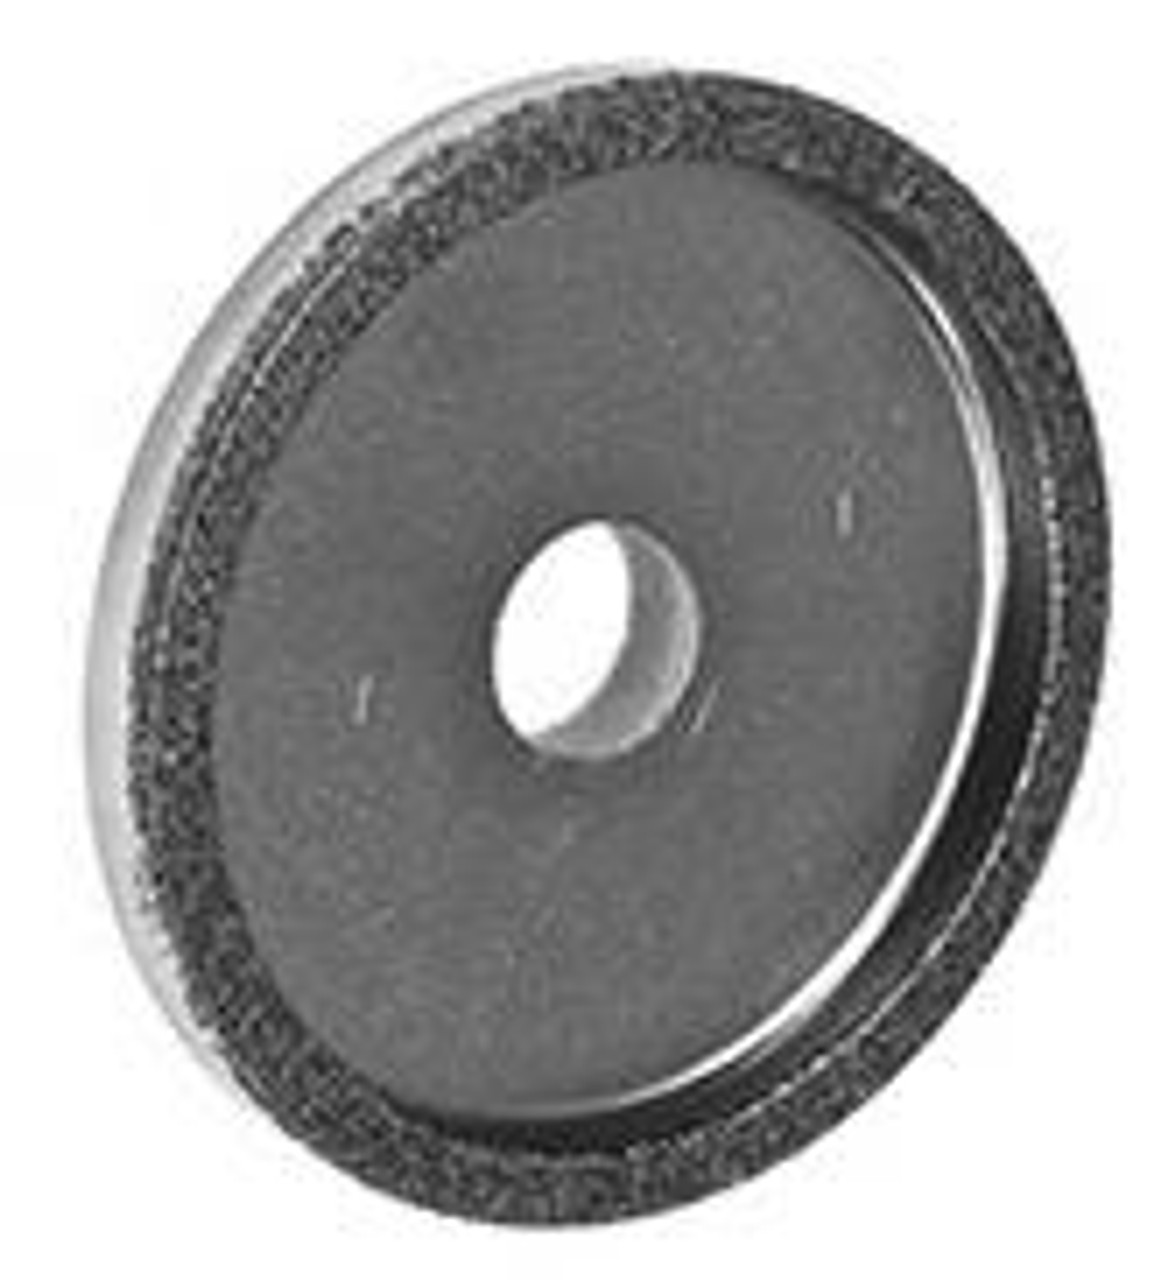 2812 2912 REPLACES 439691 GRINDING STONE FOR HOBART SLICER  2612,2712 